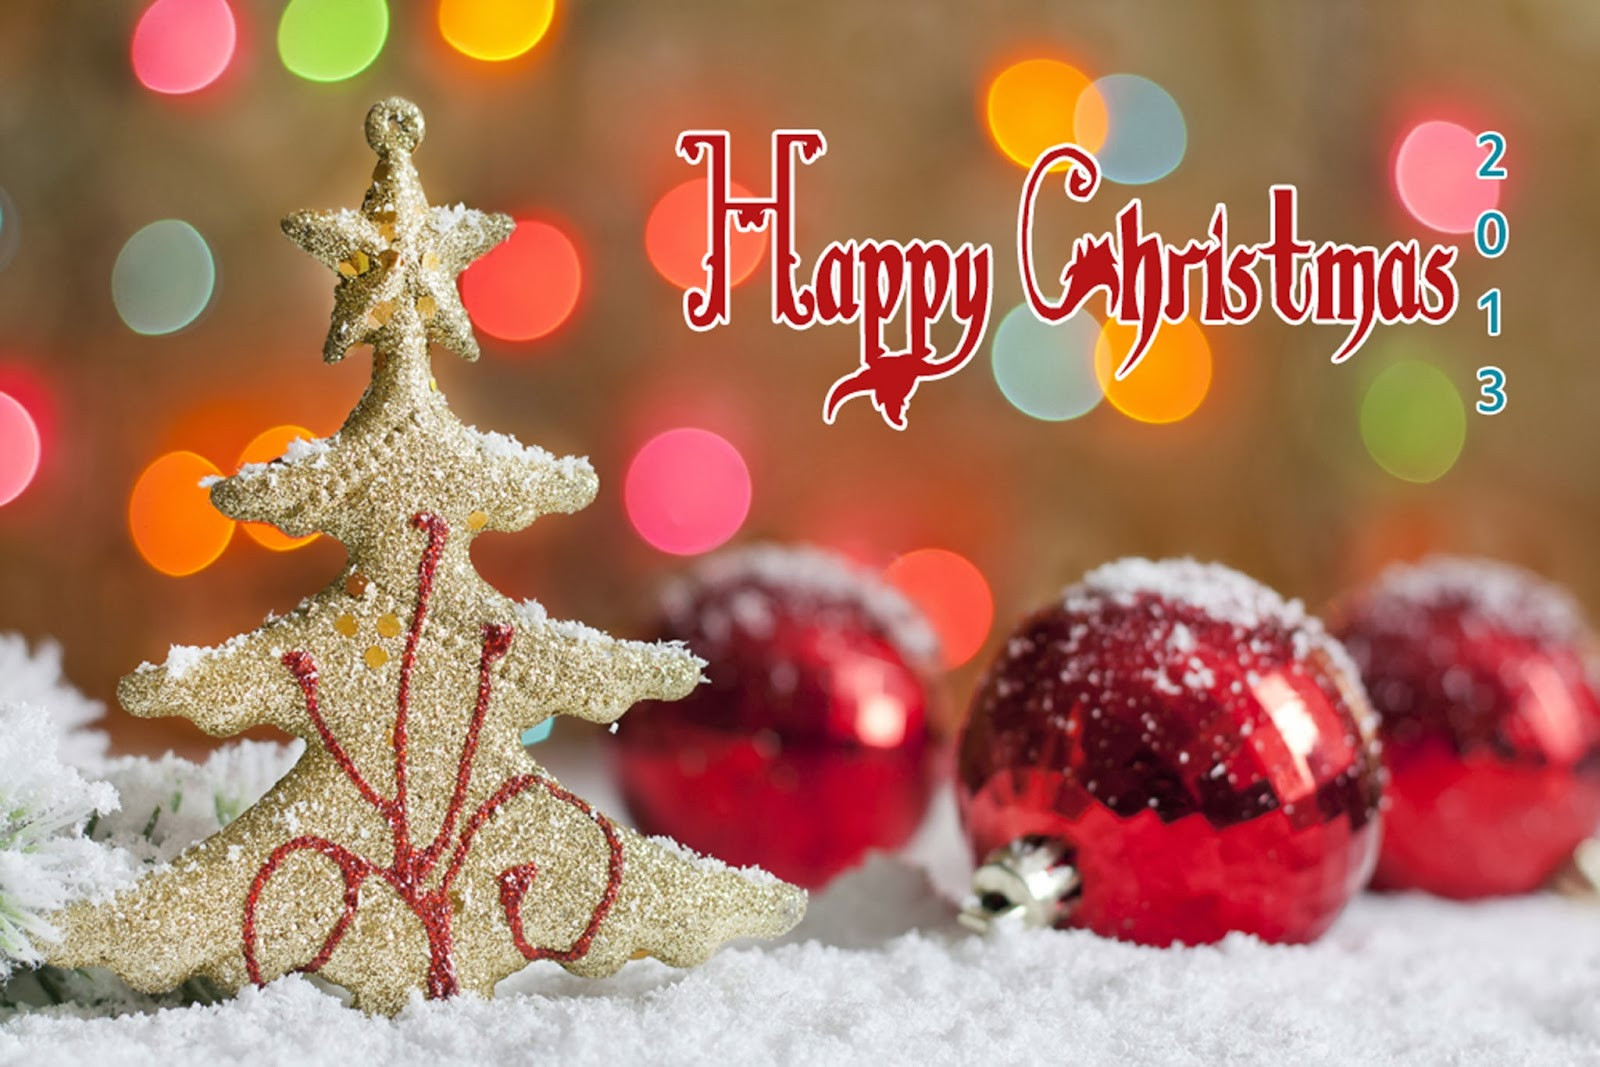 Happy Christmas Quotes
 Happy Christmas Wishes Quotes And Sayings With Greetings